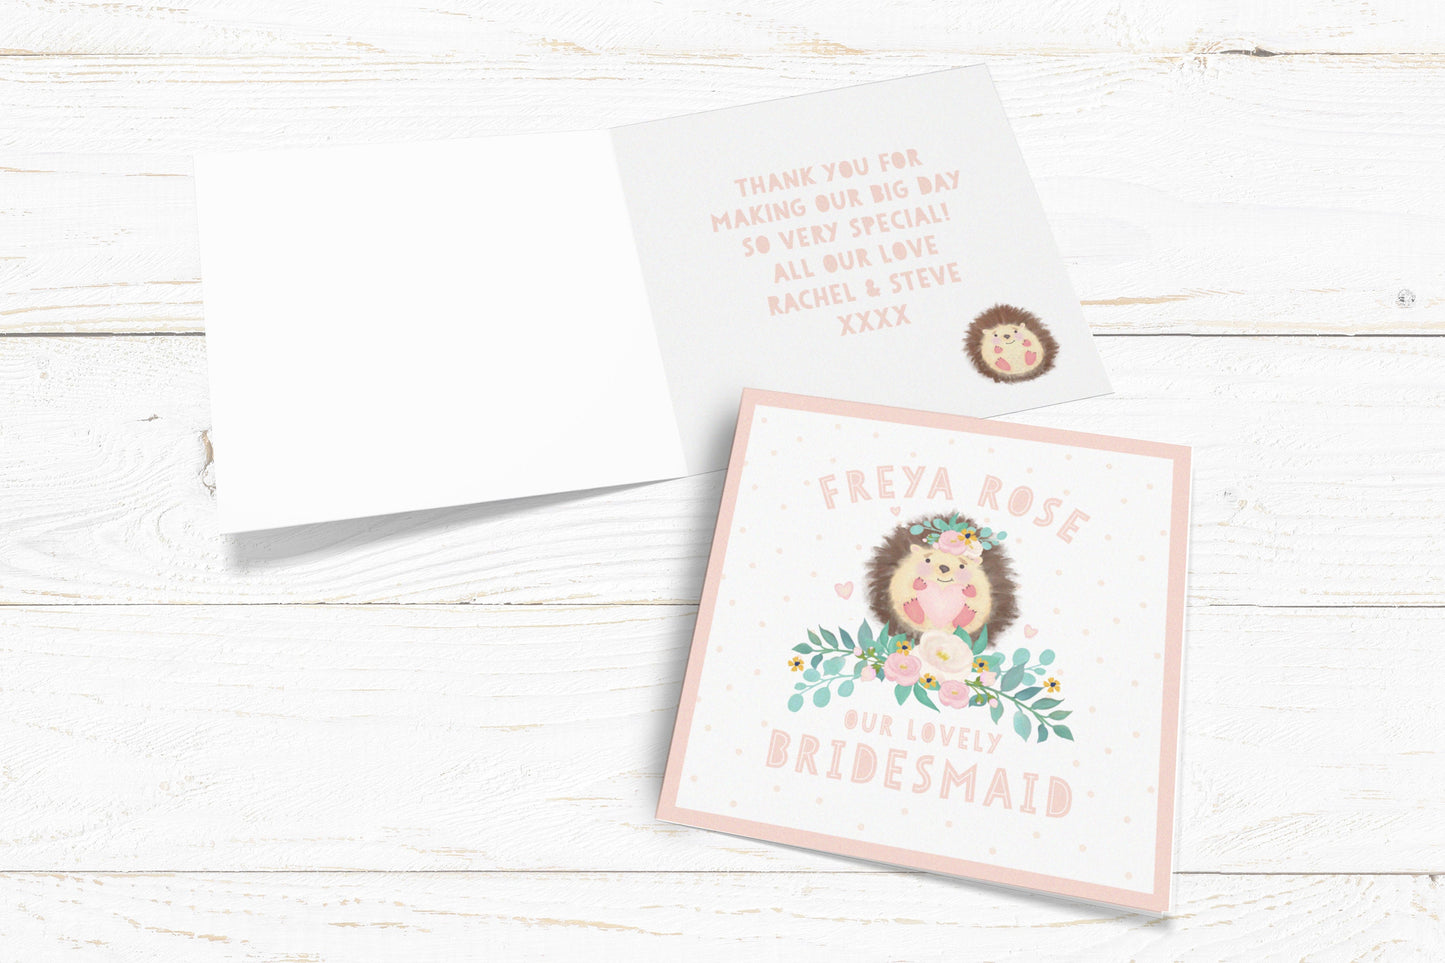 Our Lovely Bridesmaid Hedgehog Personalised Card. Maid of Honour, Flower Girl, Ring Bearer, Mother of the Bride/Groom.Send Direct Option.